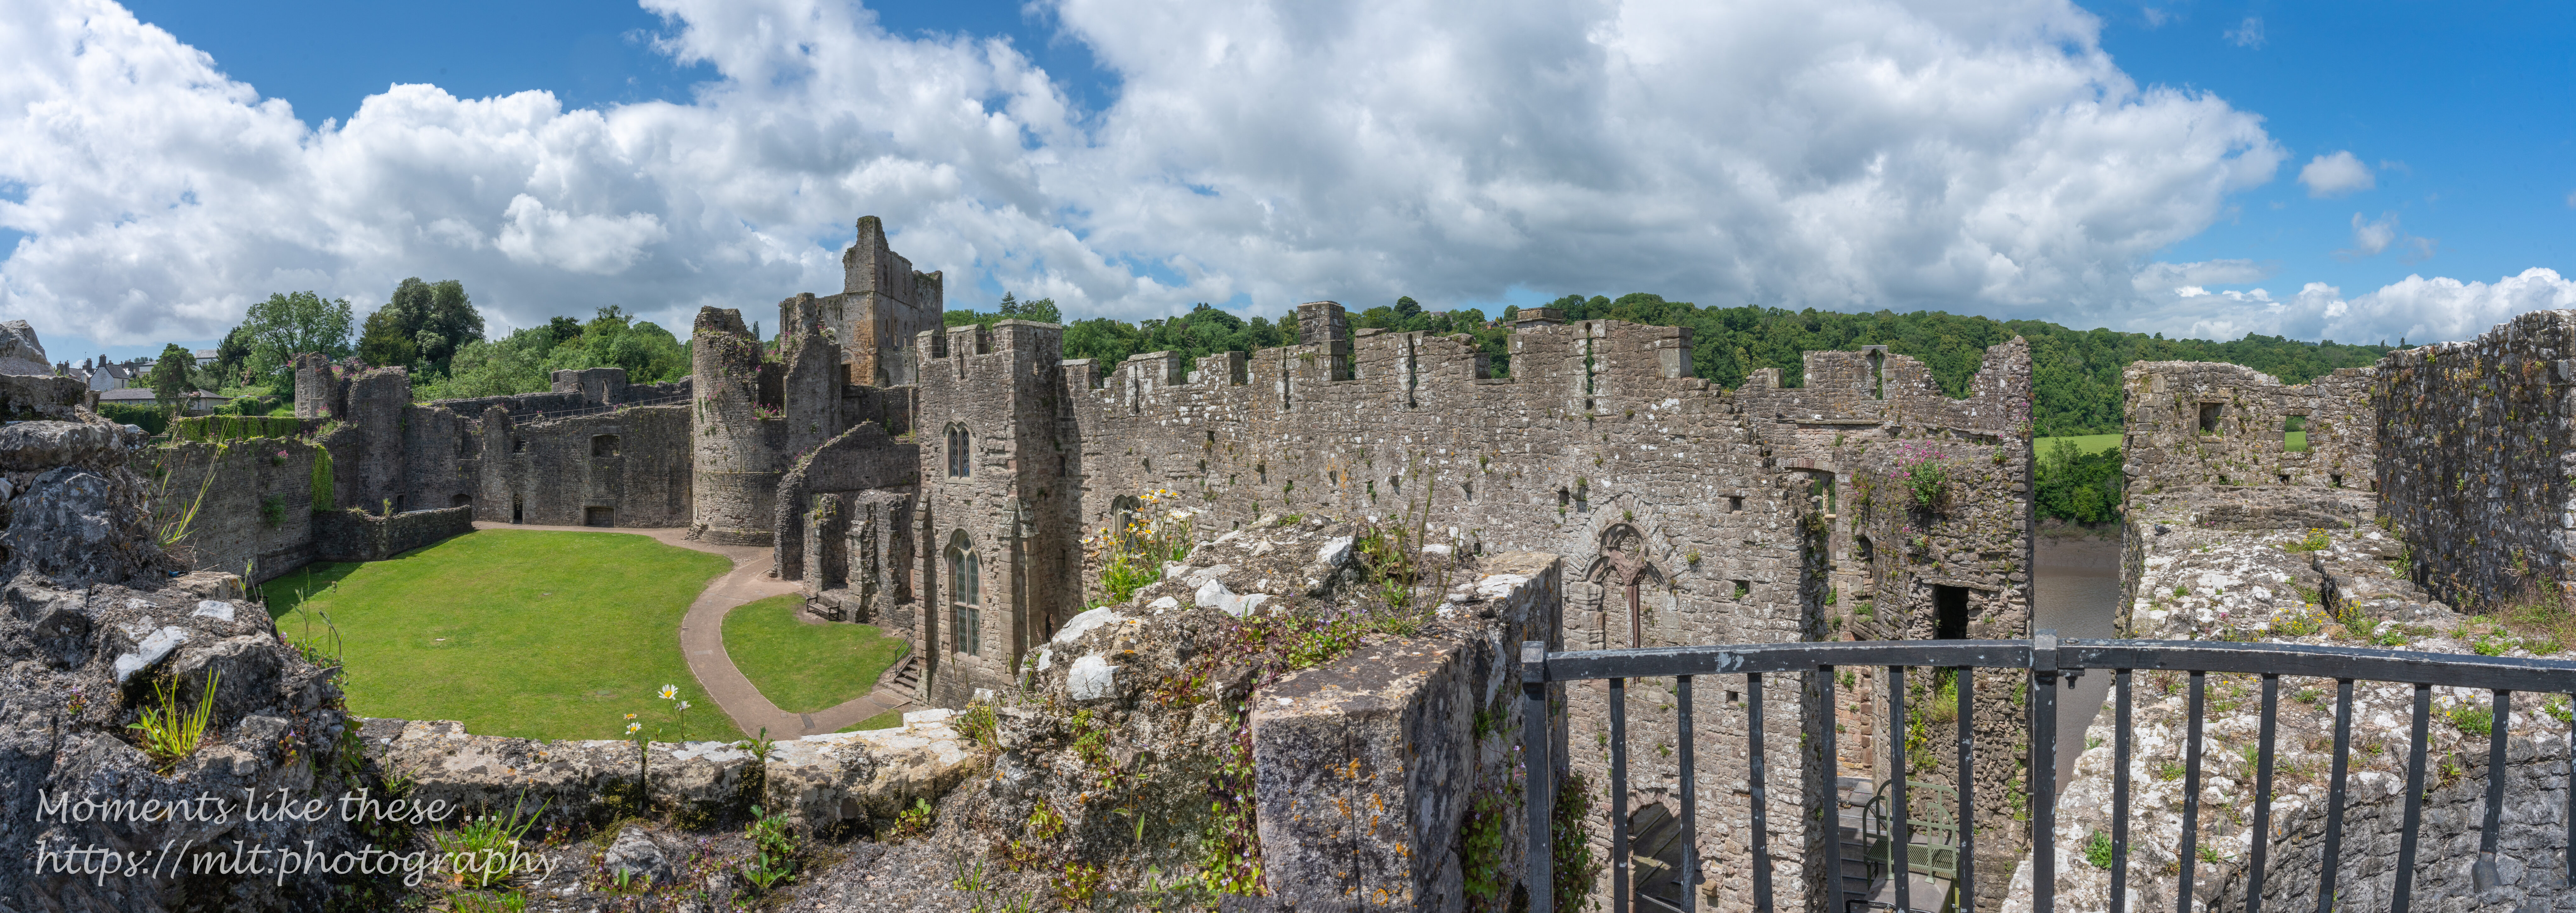 Chepstow Castle - a panorama